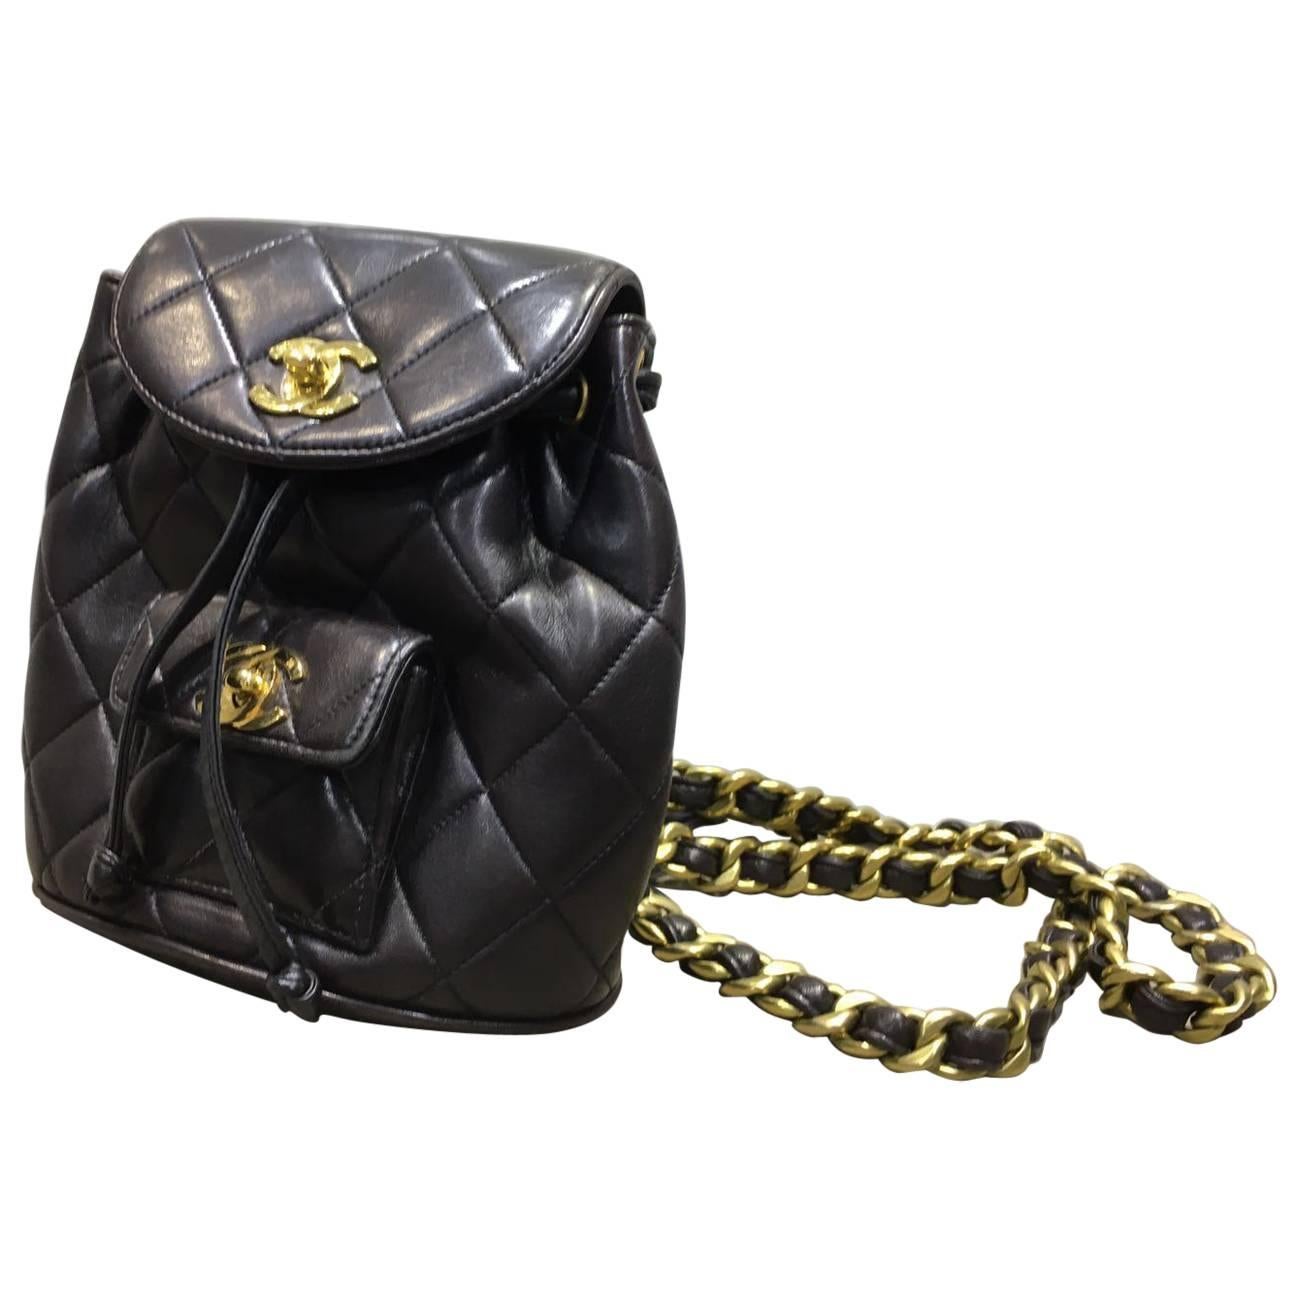 Chanel Black Quilted Lambskin Leather Mini Backpack Bag